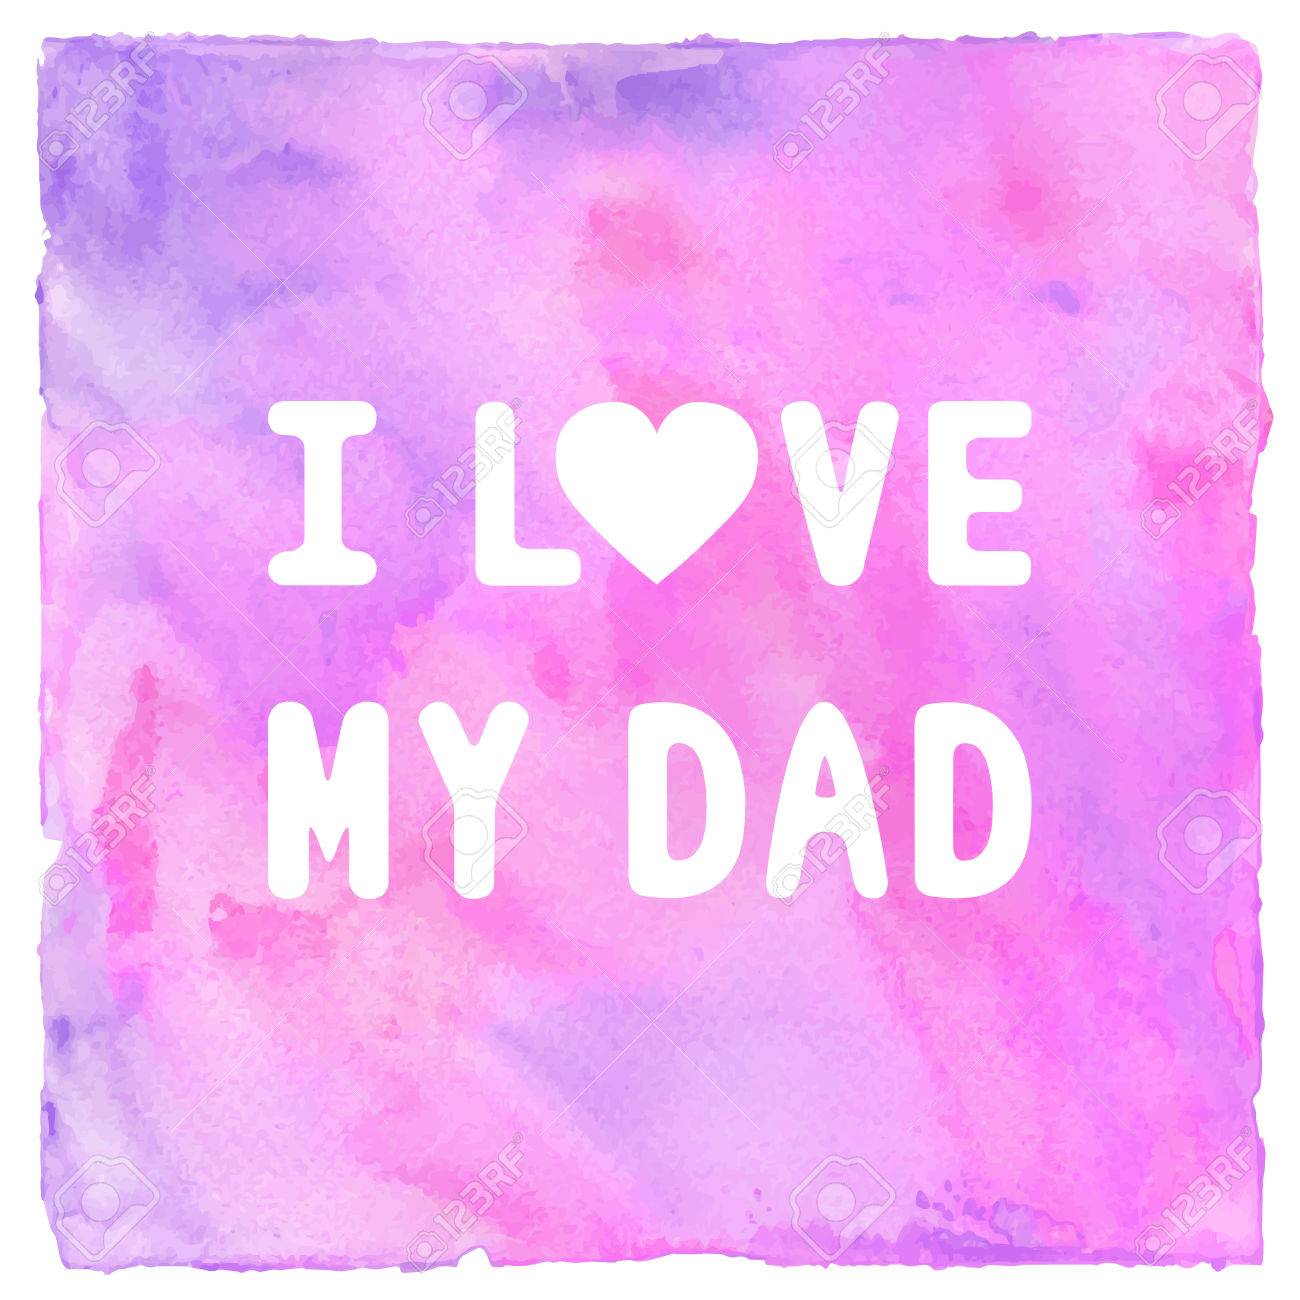 I love you my dad HD wallpapers  Pxfuel